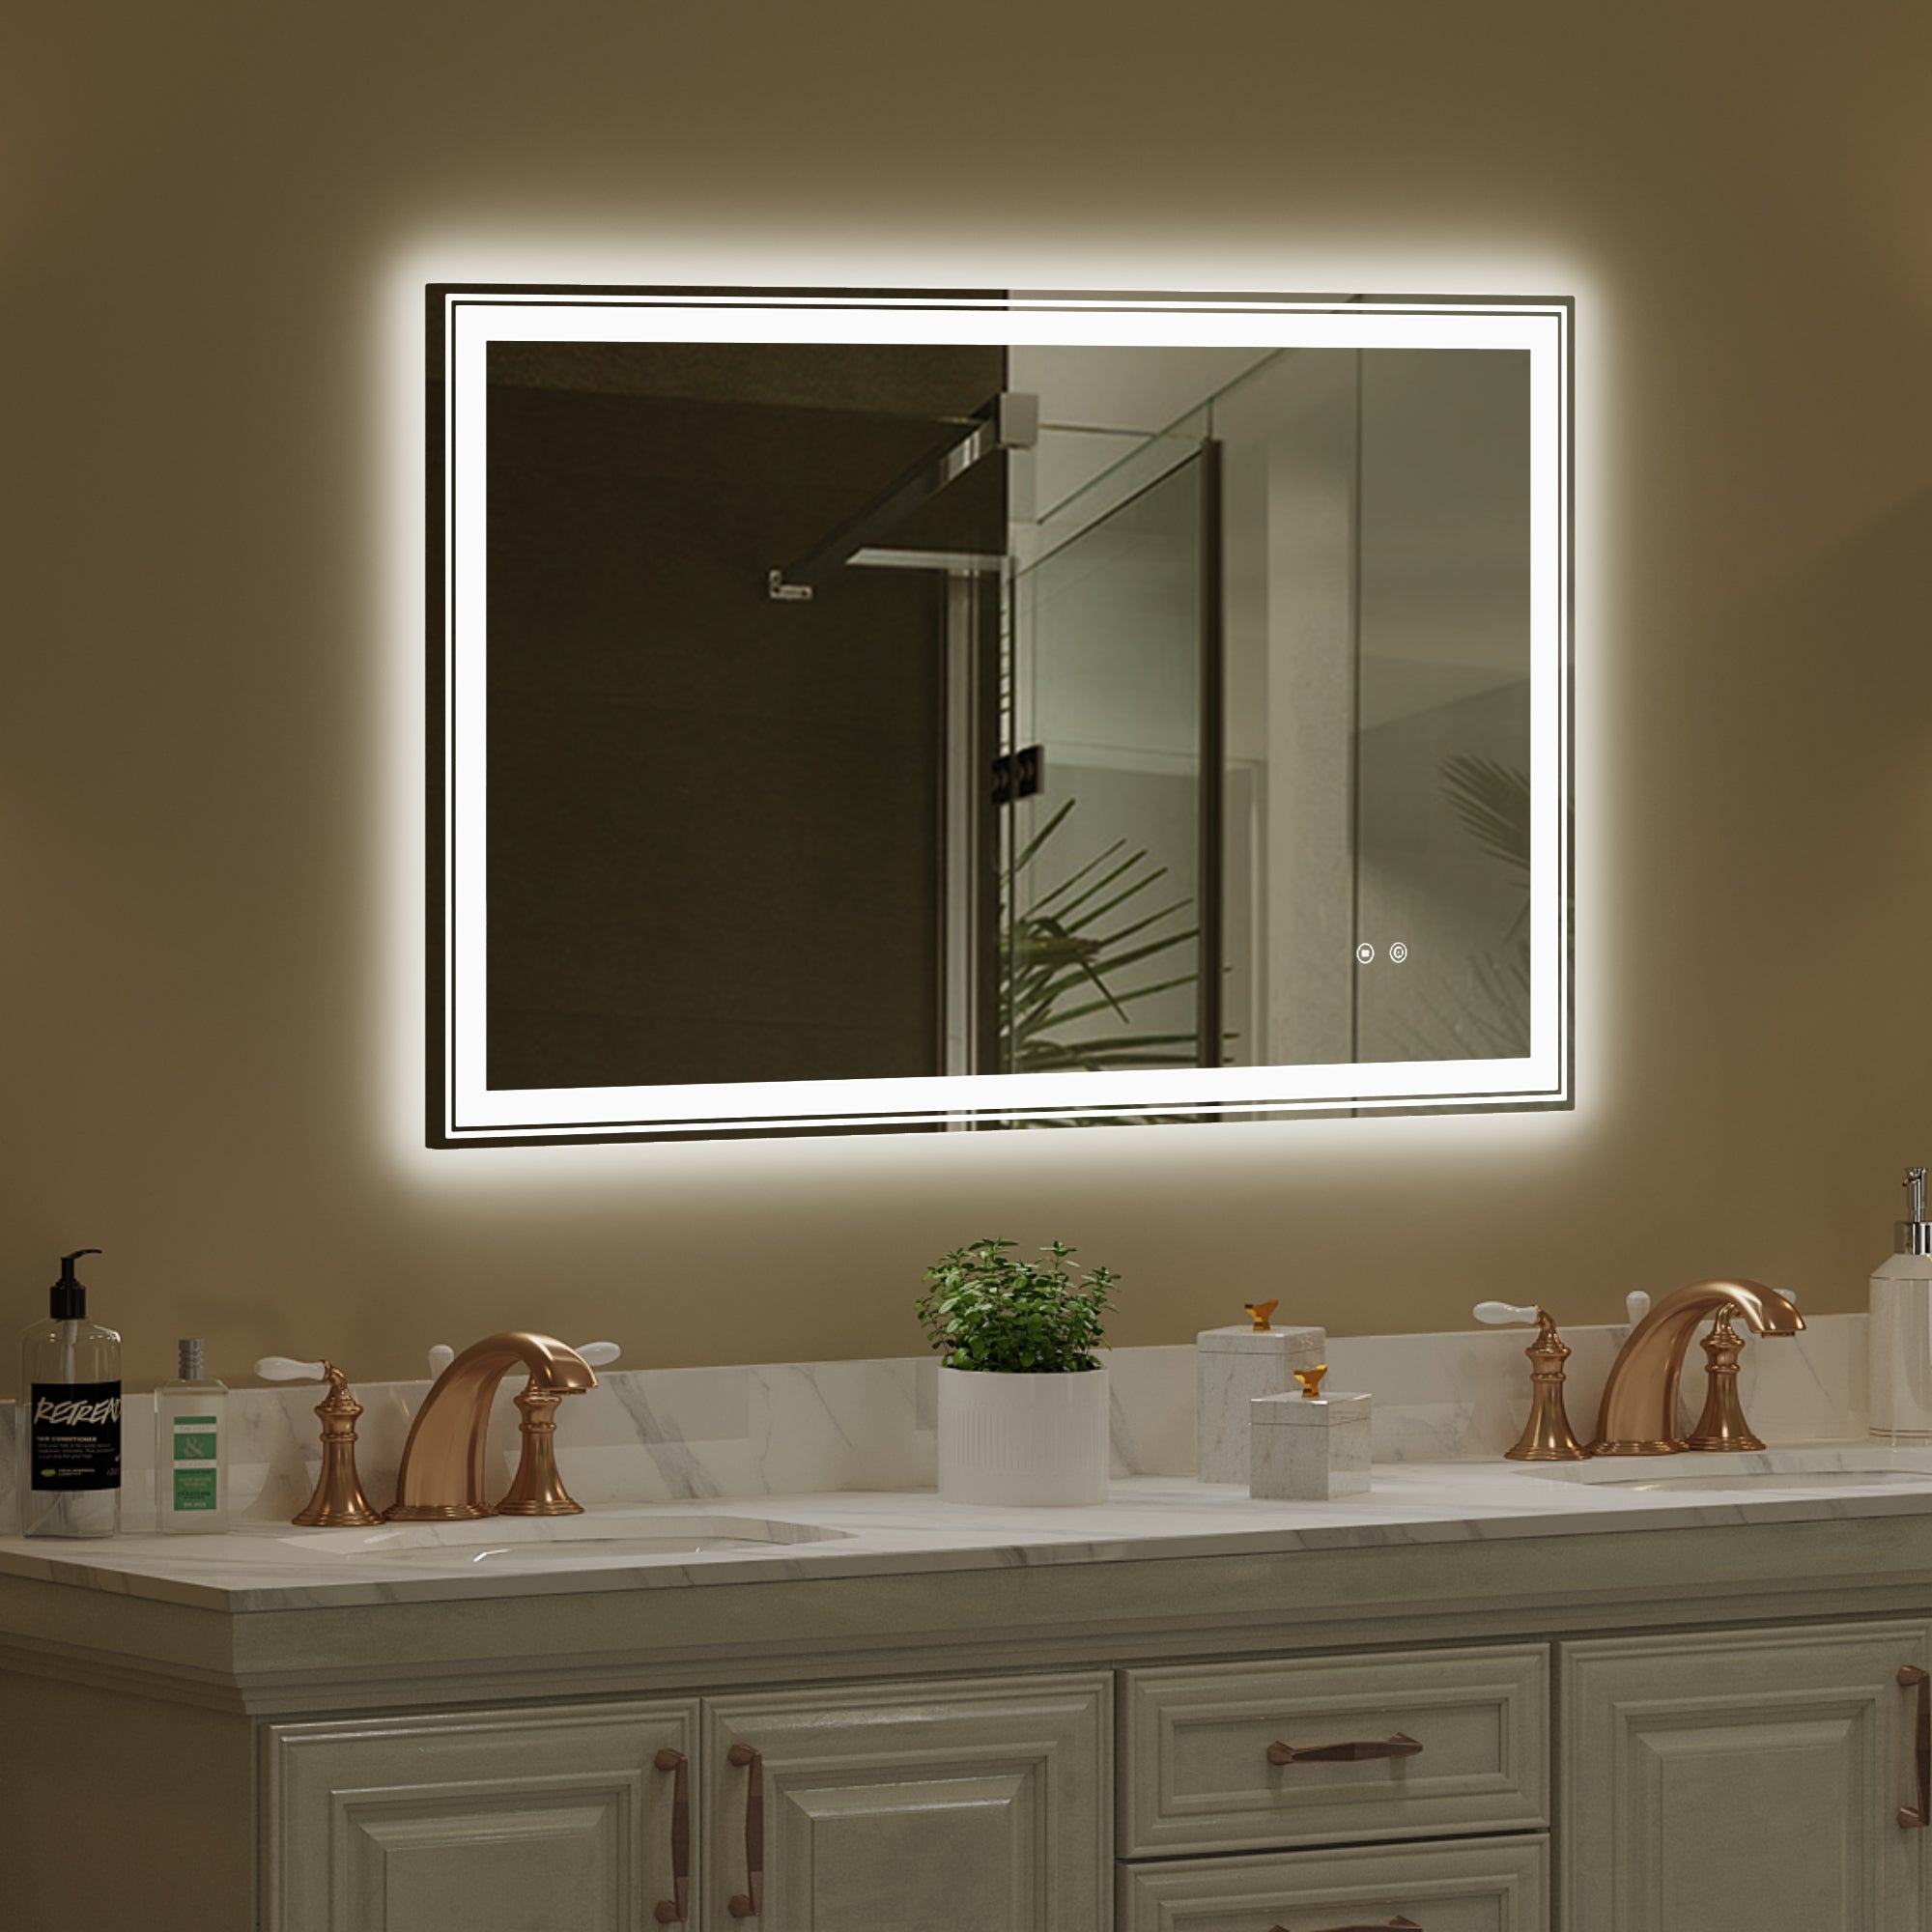 48"×30"  LED Bathroom Vanity Mirror with Anti-Fog and Adjustable Brightness front and back light 